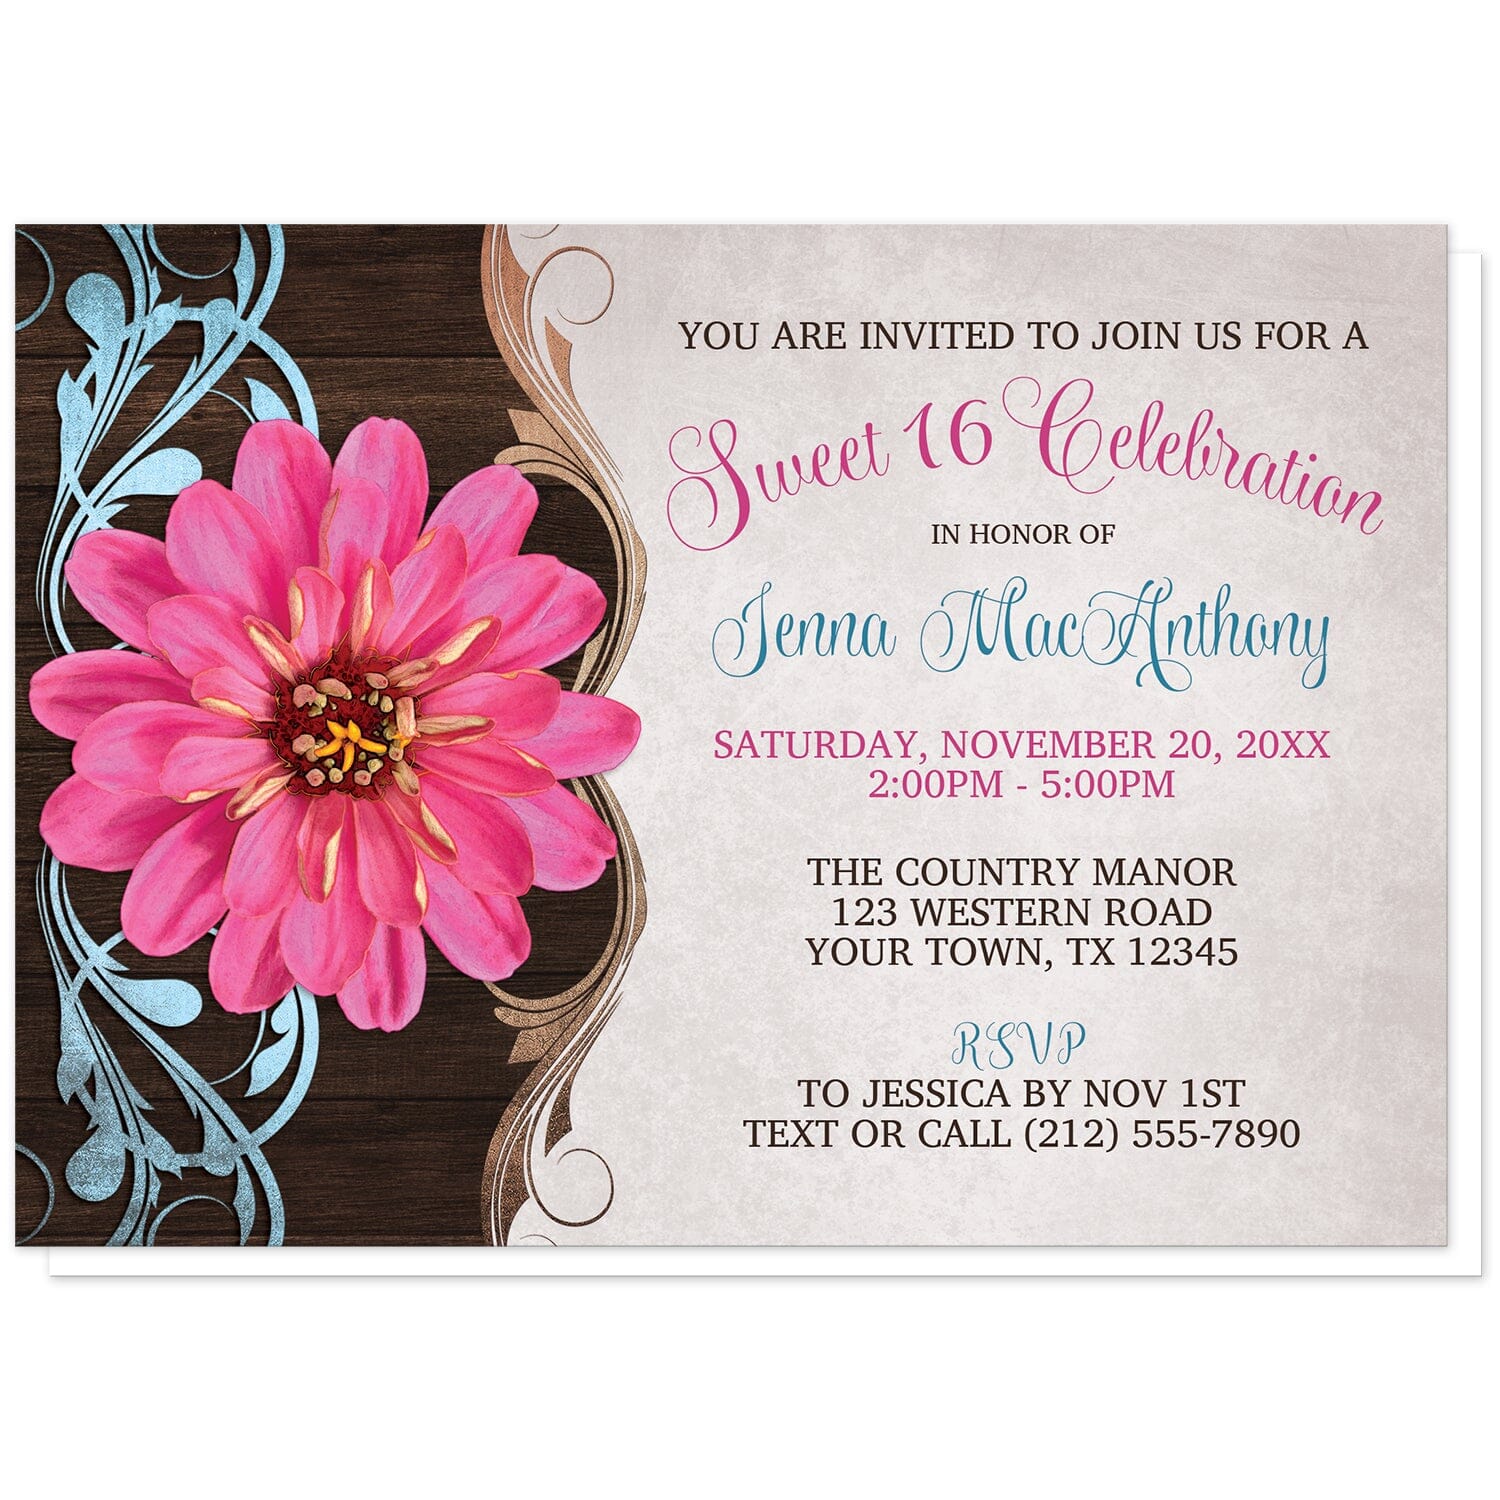 Rustic Country Pink Zinnia Sweet 16 Invitations at Artistically Invited. Southern-inspired rustic country pink zinnia Sweet 16 invitations with a pretty and vibrant pink zinnia flower over a brown wood pattern with blue and tan flourishes along the left side. Your personalized sweet sixteen party details are custom printed in brown, blue, and pink over a light parchment-colored background.